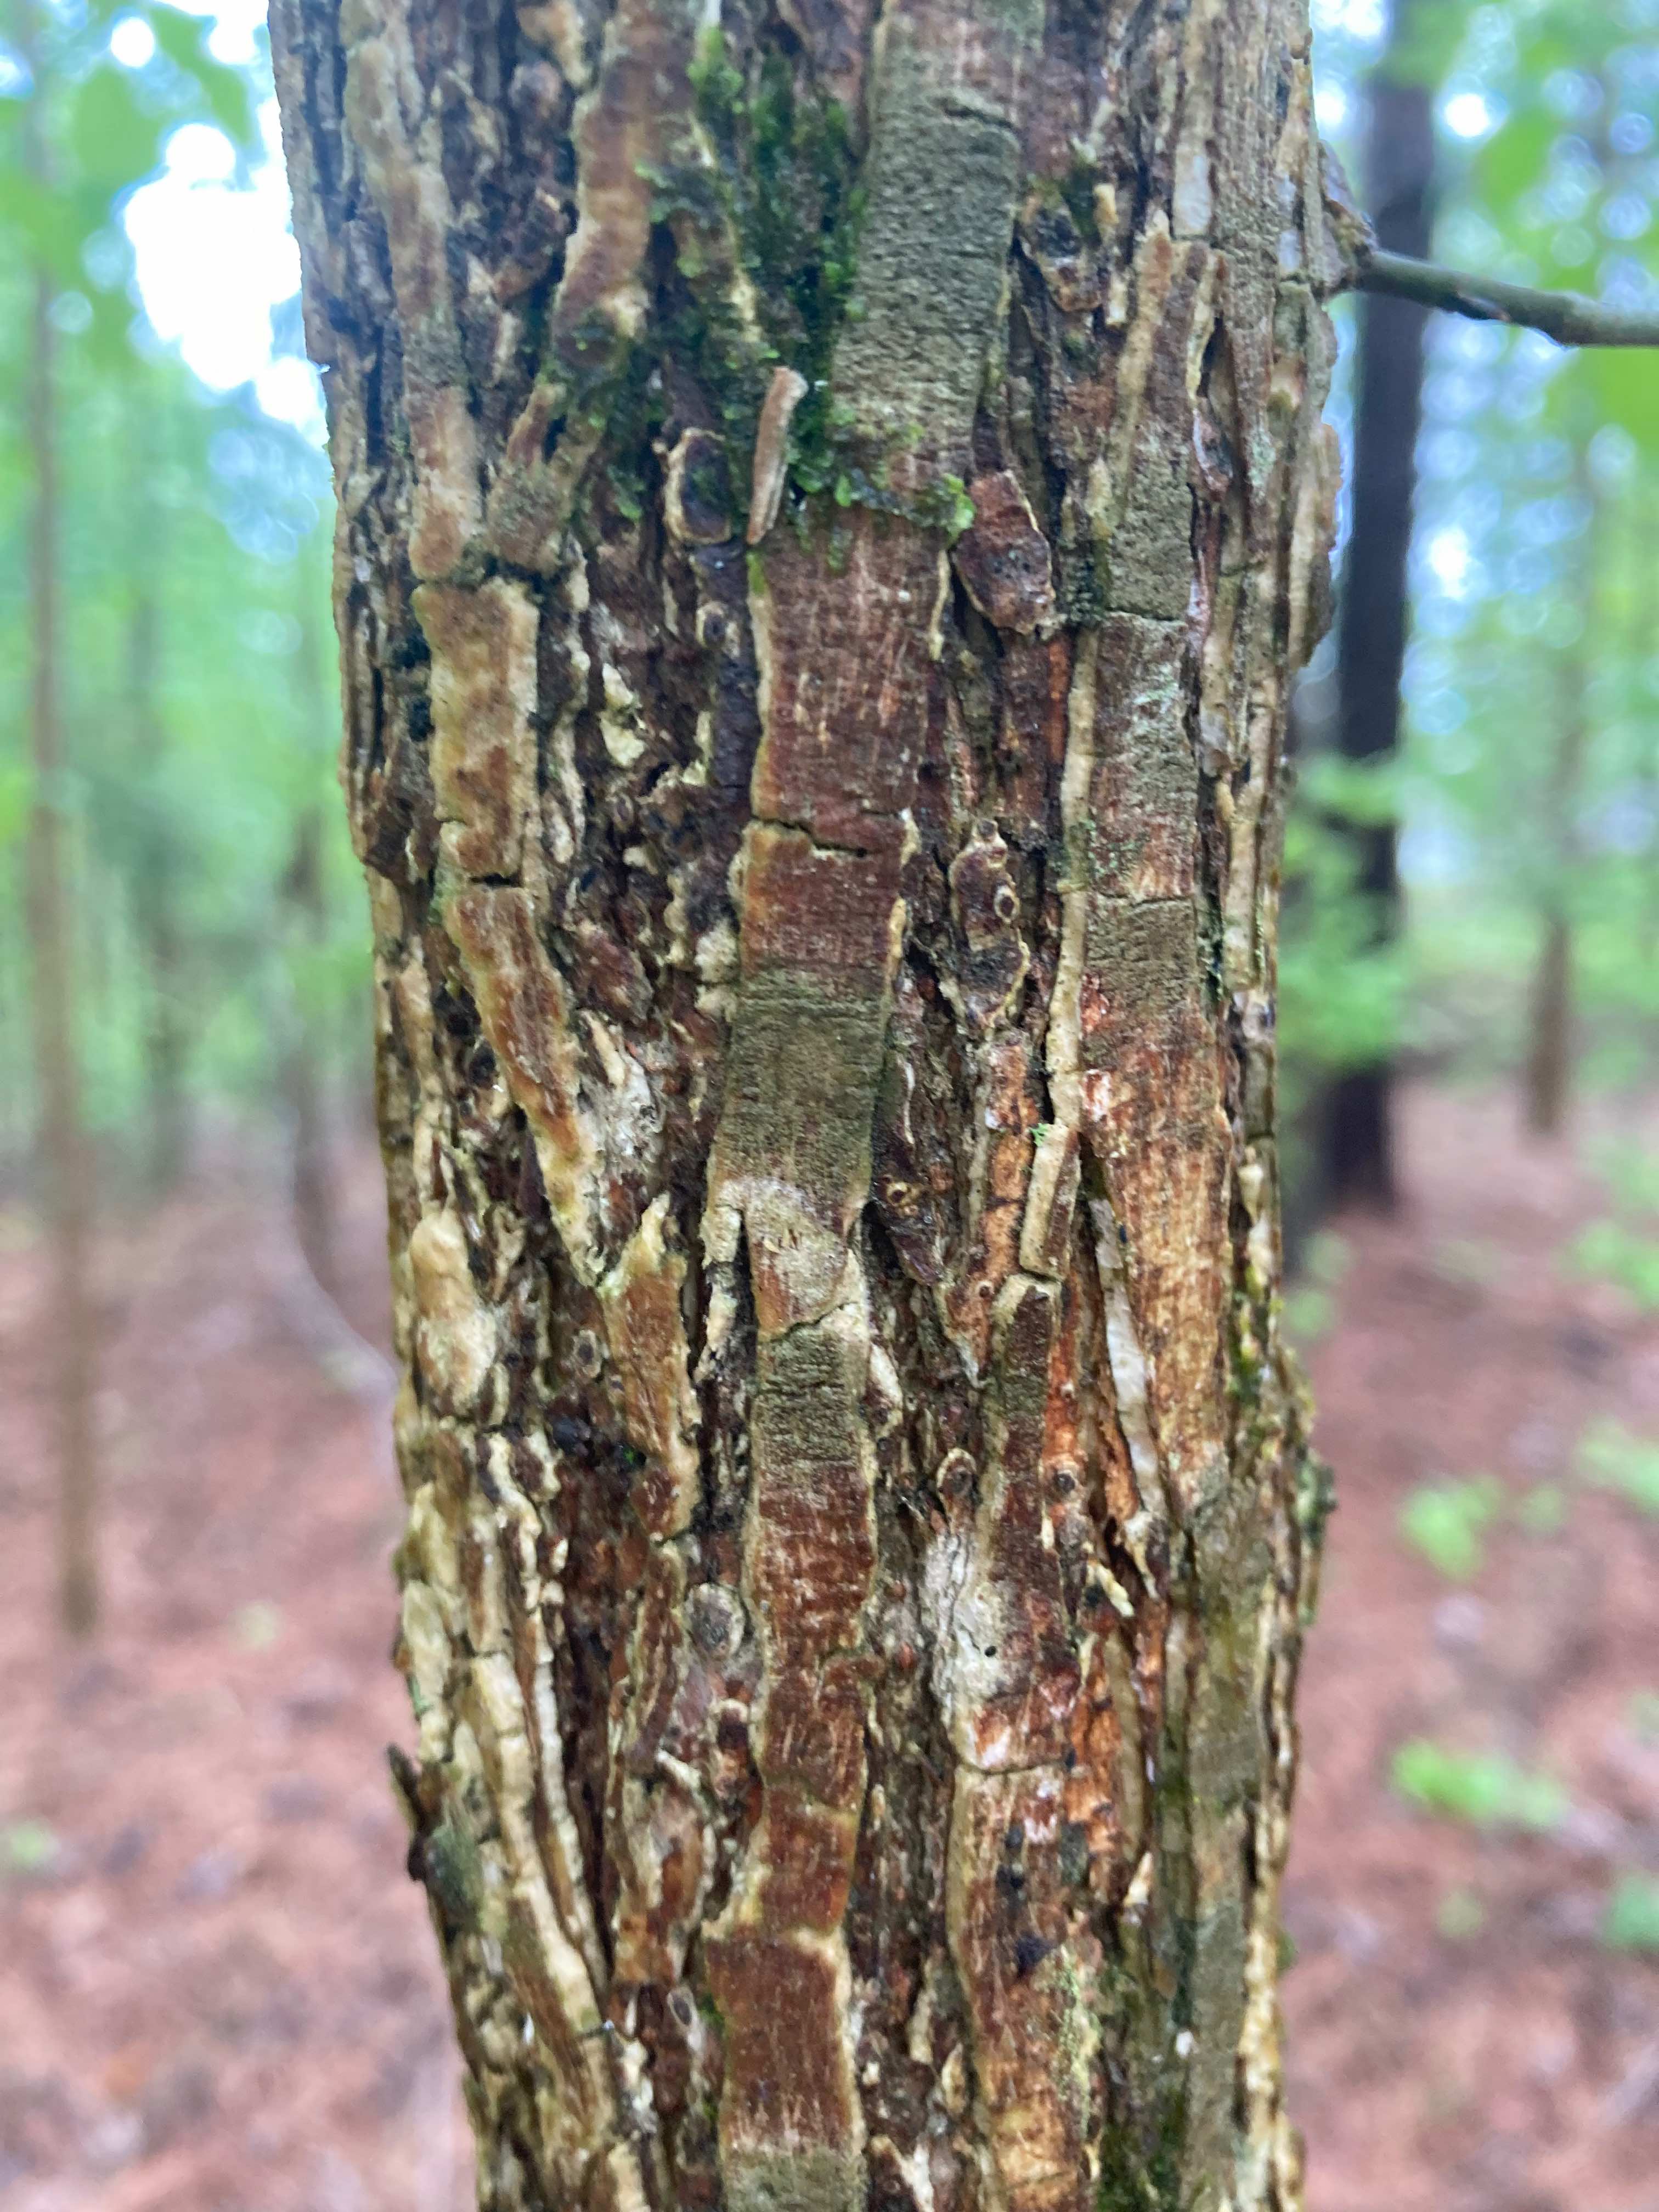 The Scientific Name is Ulmus americana. You will likely hear them called American Elm, White Elm. This picture shows the Bark is spongy, and has strong crisscrossing ridges. of Ulmus americana